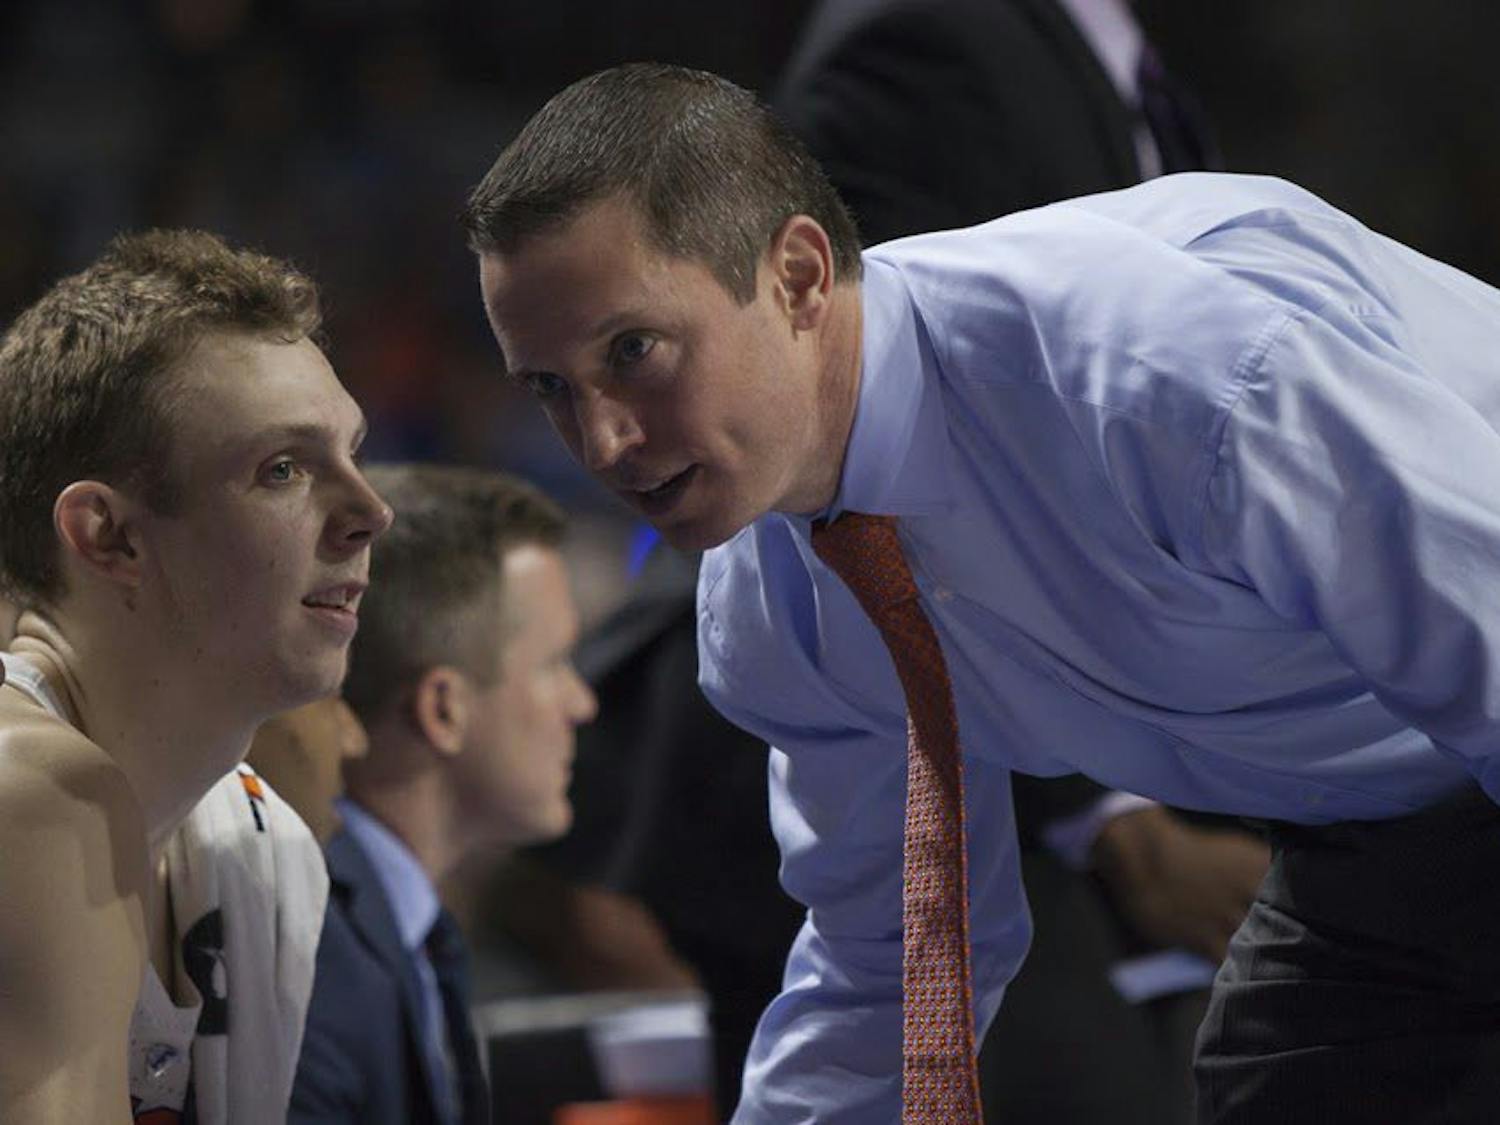 In just his second season, UF men's basketball coach Mike White elevated a team that made the NIT tournament a year prior into one of the country’s top contenders.